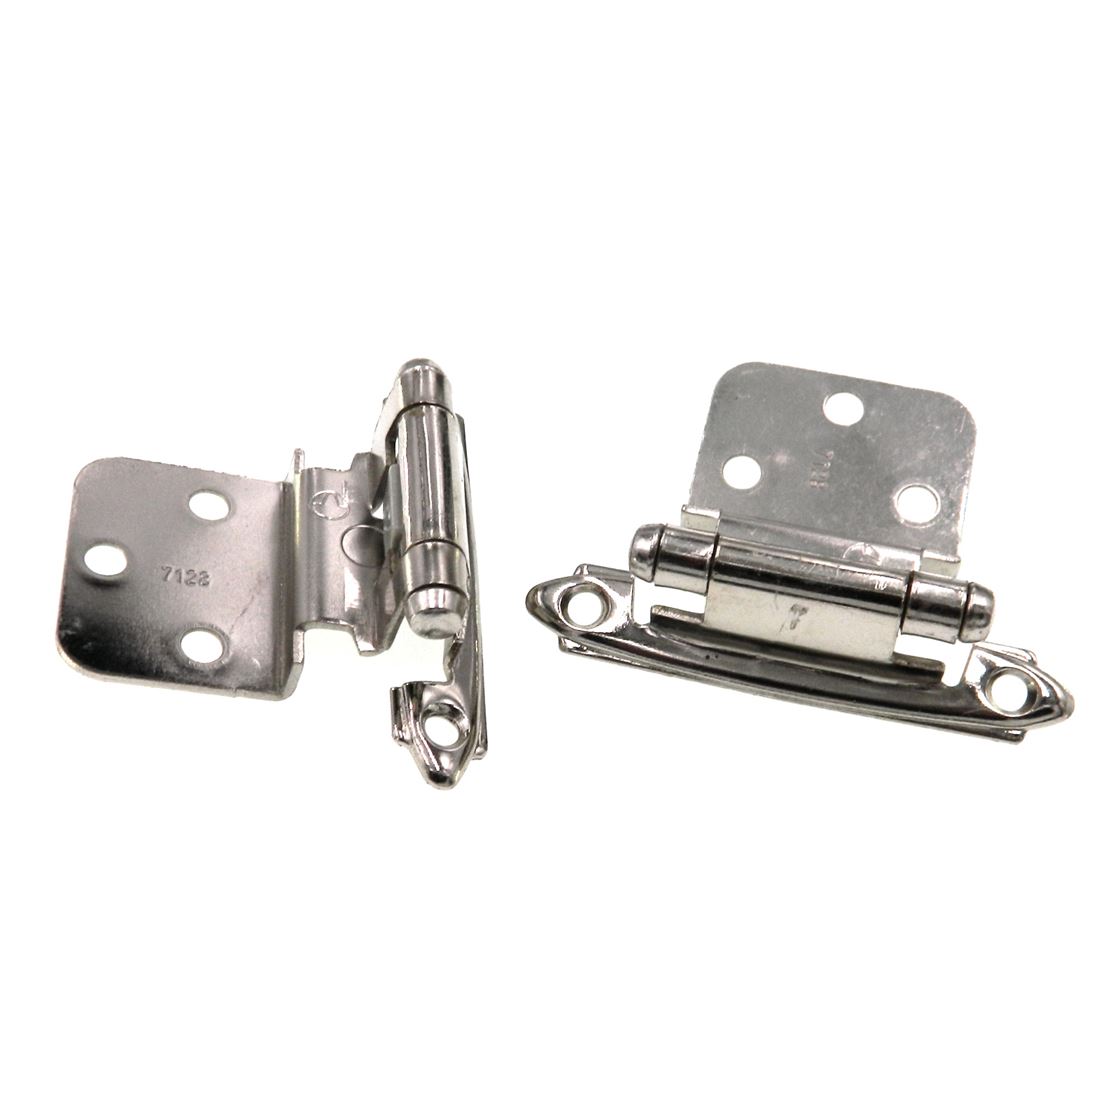 Pair of Amerock Polished Chrome Self-Closing 3/8" Inset Cabinet Hinges BP7128-26